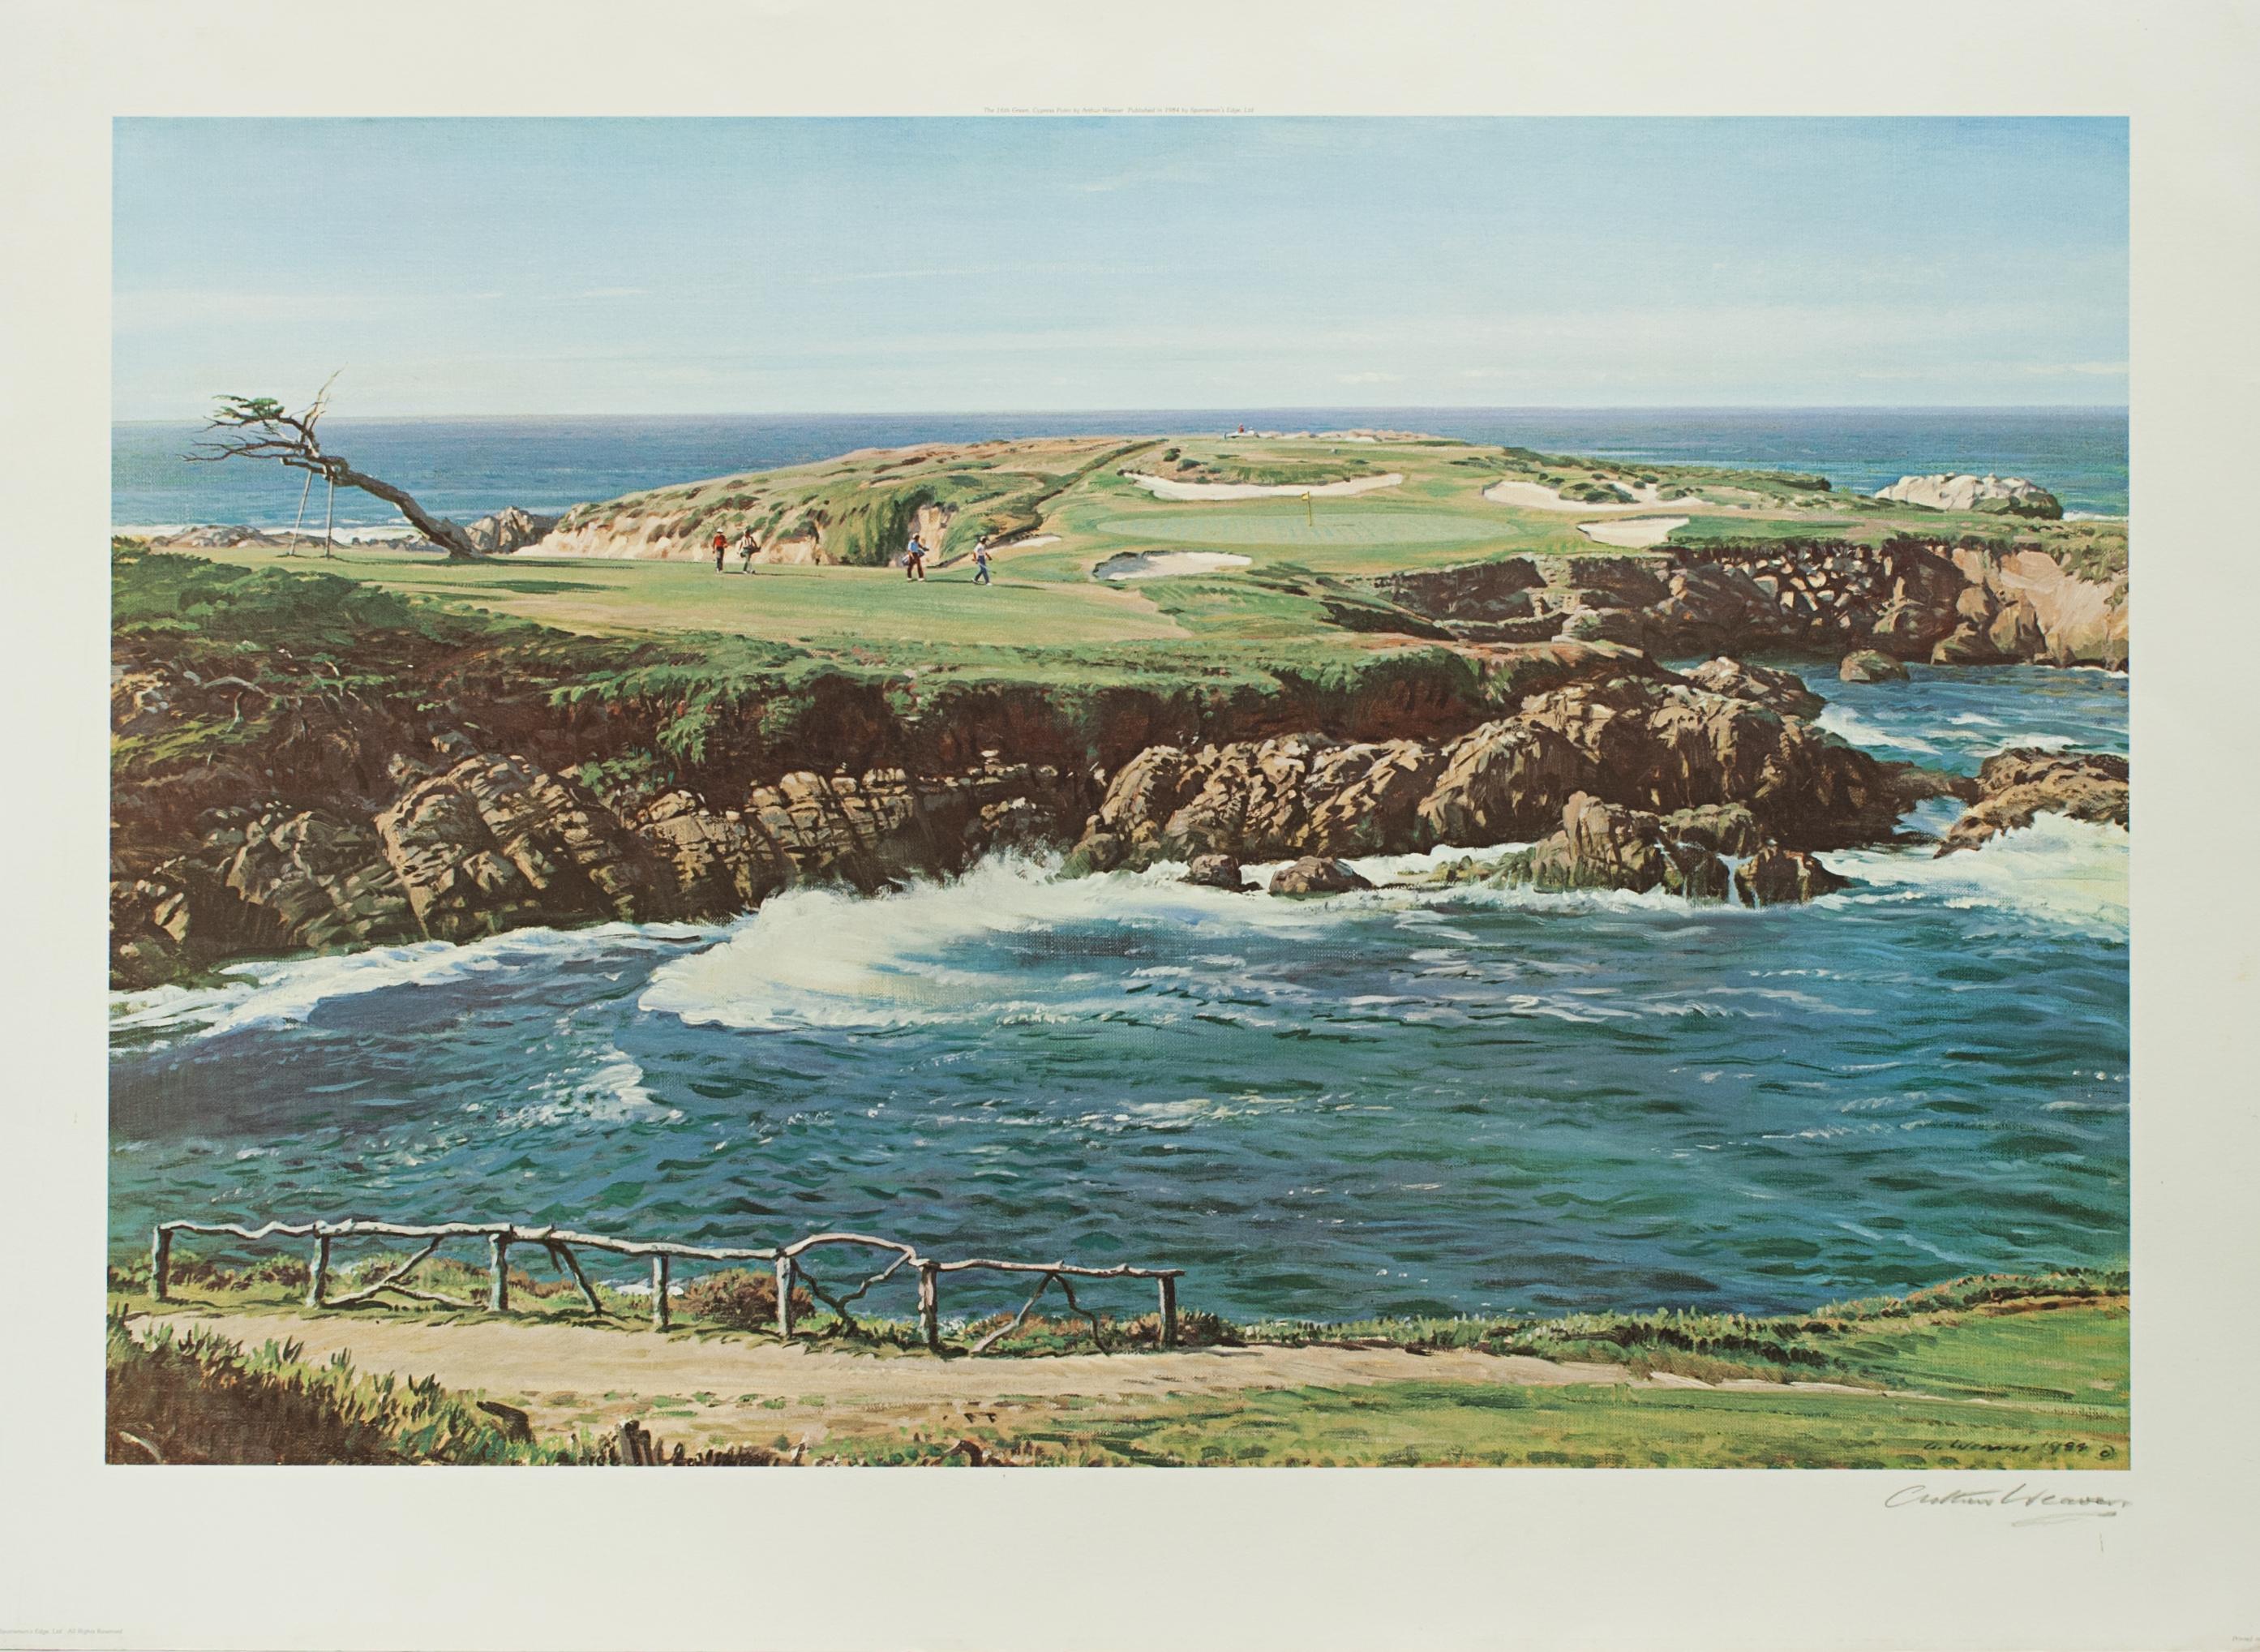 16th Hole at Cypress Point by Arthur Weaver.
A good large golfing photolithograph taken from the original painting by Arthur Weaver; 16th Green at Cypress Point, published in 1984 by Sportsman's edge, Ltd. Signed in pencil by the artist. The